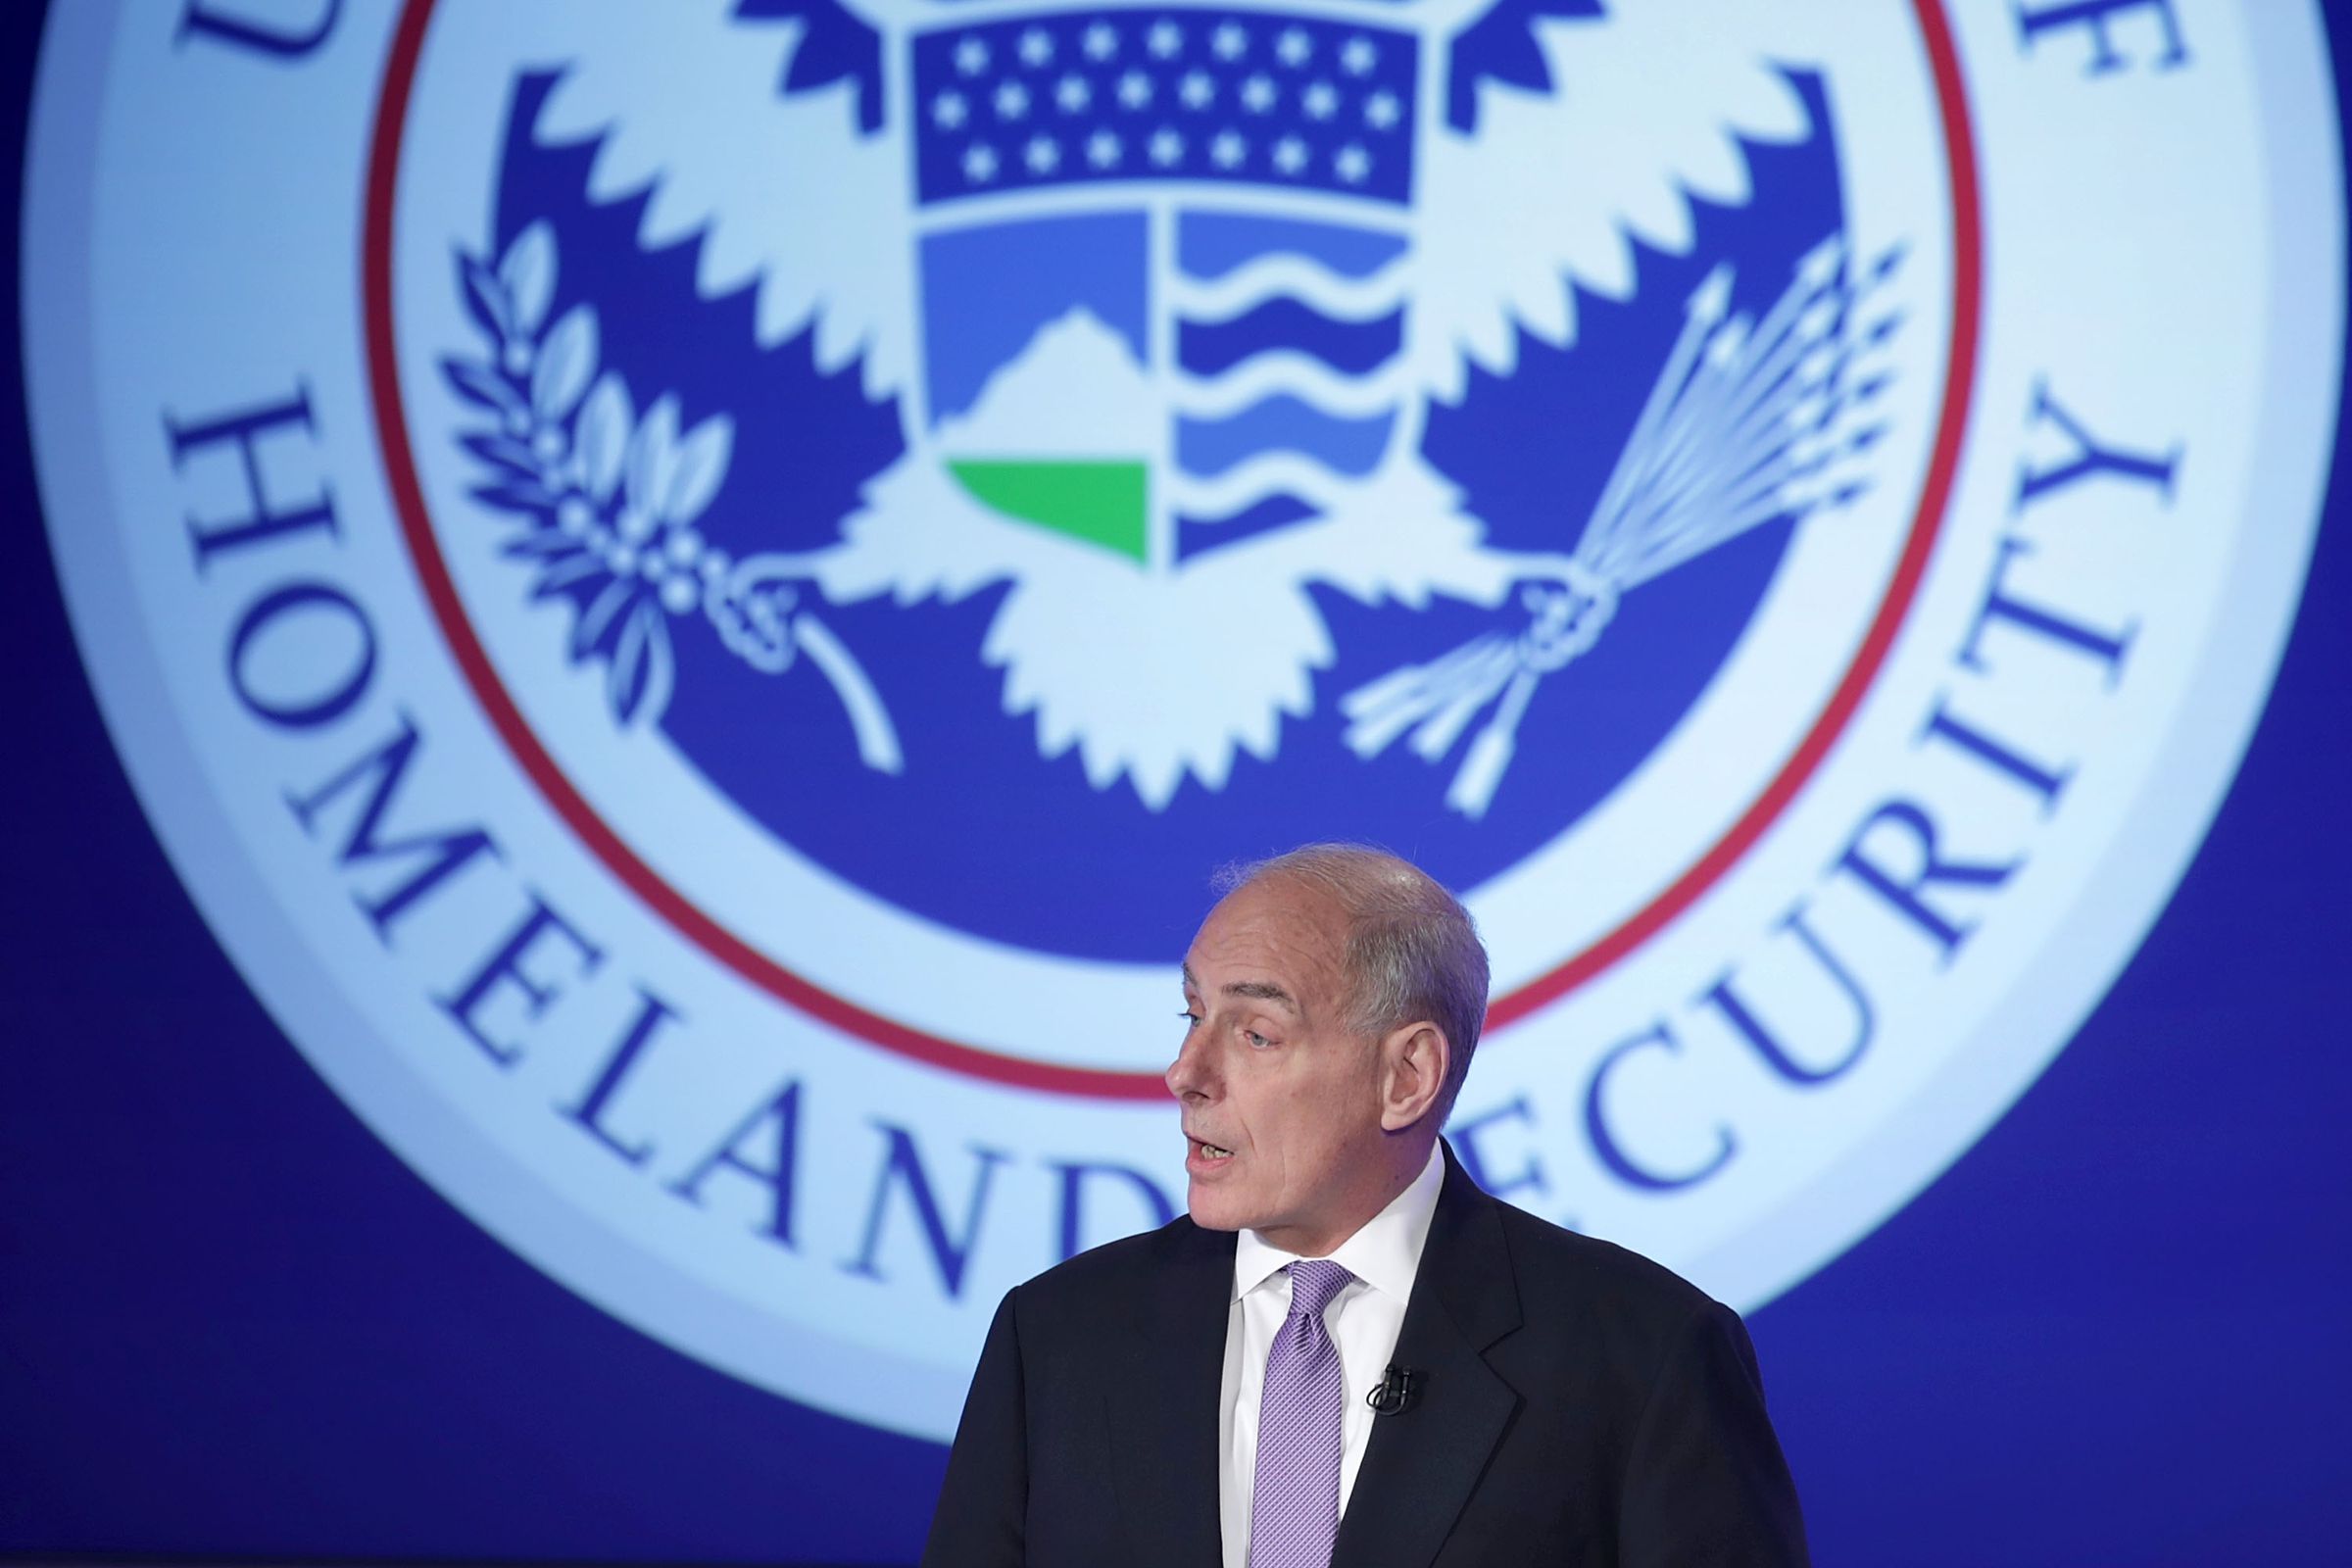 Homeland Security Secretary Kelly Delivers Remarks On Threats To U.S.